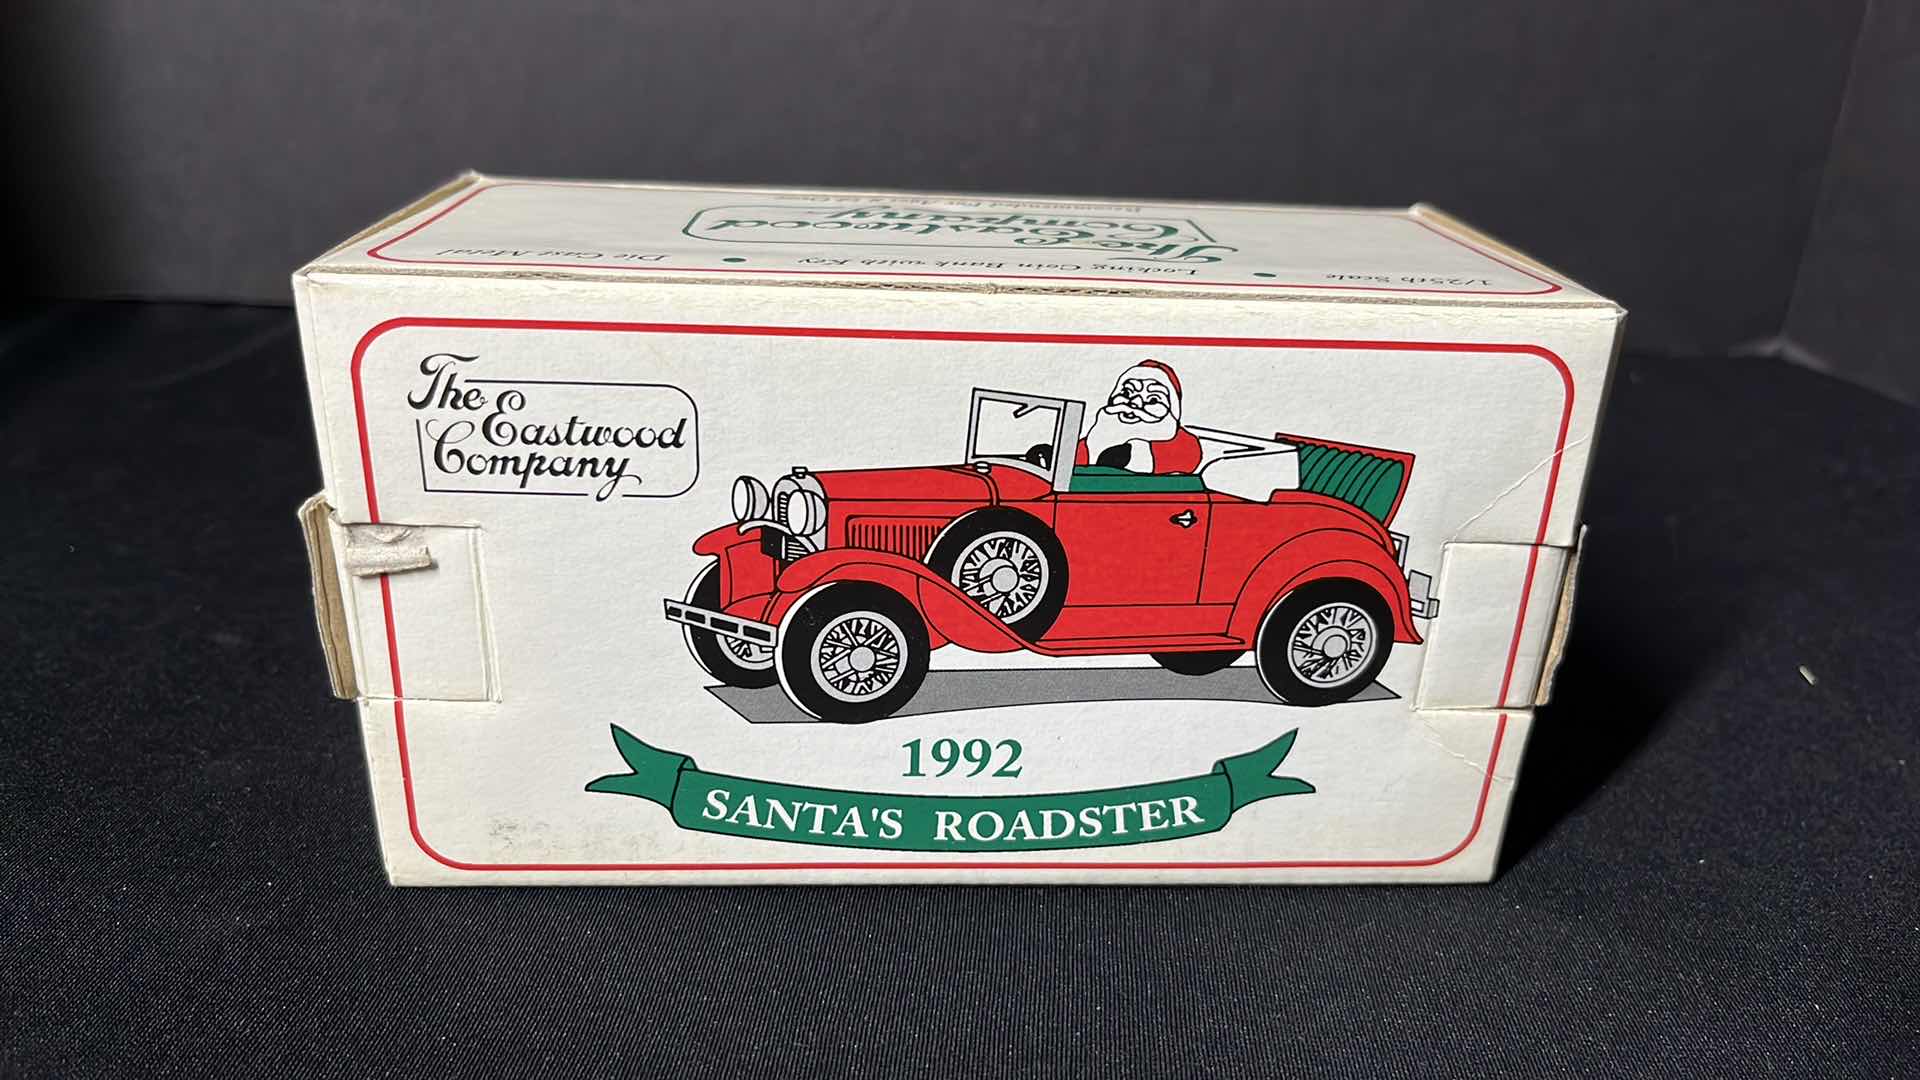 Photo 7 of THE EASTWOOD COMPANY DIE-CAST METAL GORD MODEL A 1992 SANTA’S ROADSTER LOCKING COIN BANK W KEY (STOCK #1928)